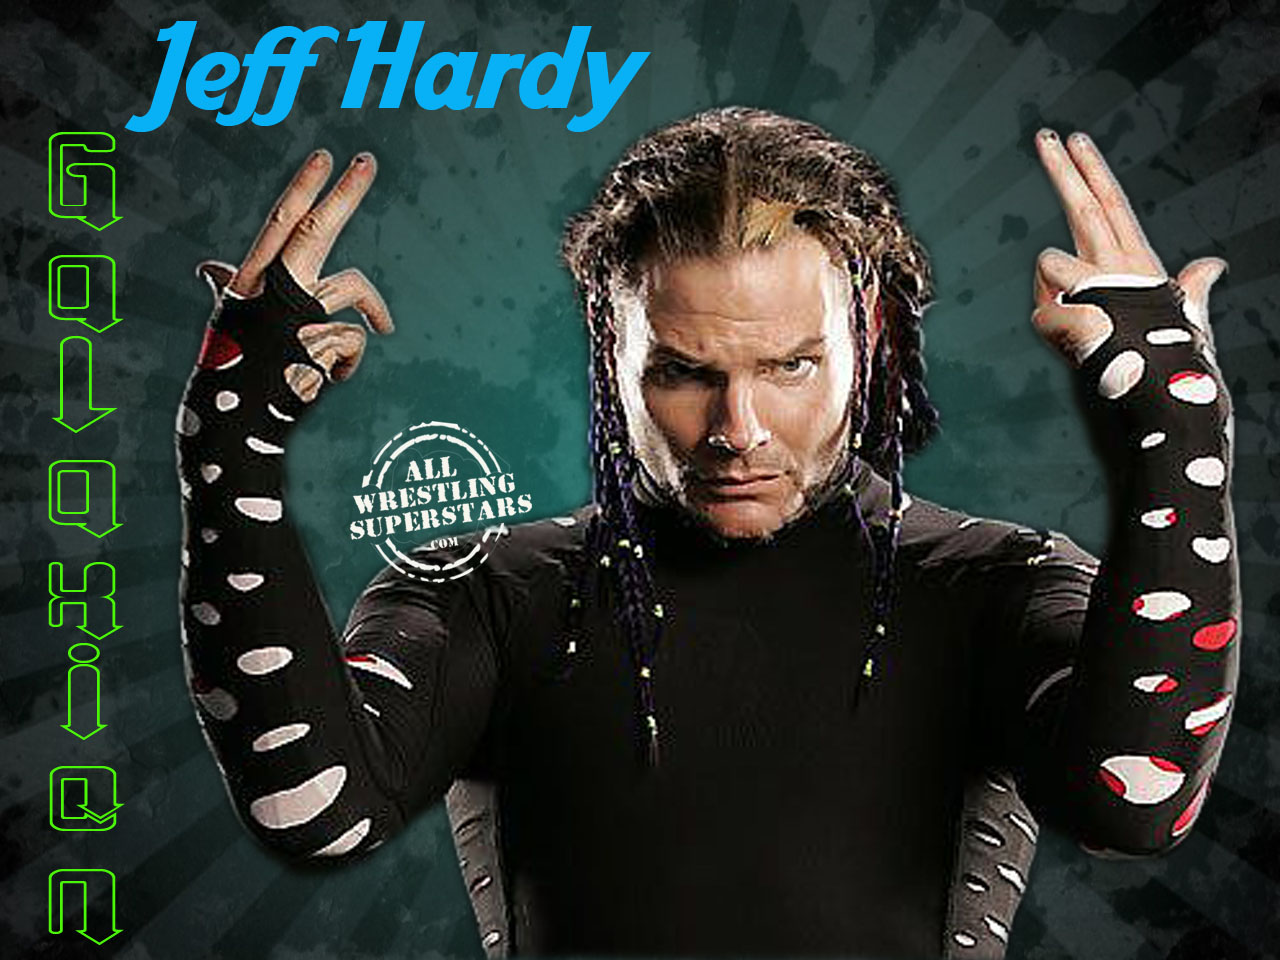 Stylish Jeff Hardy In Black Outfits Great Gesture Click On Image